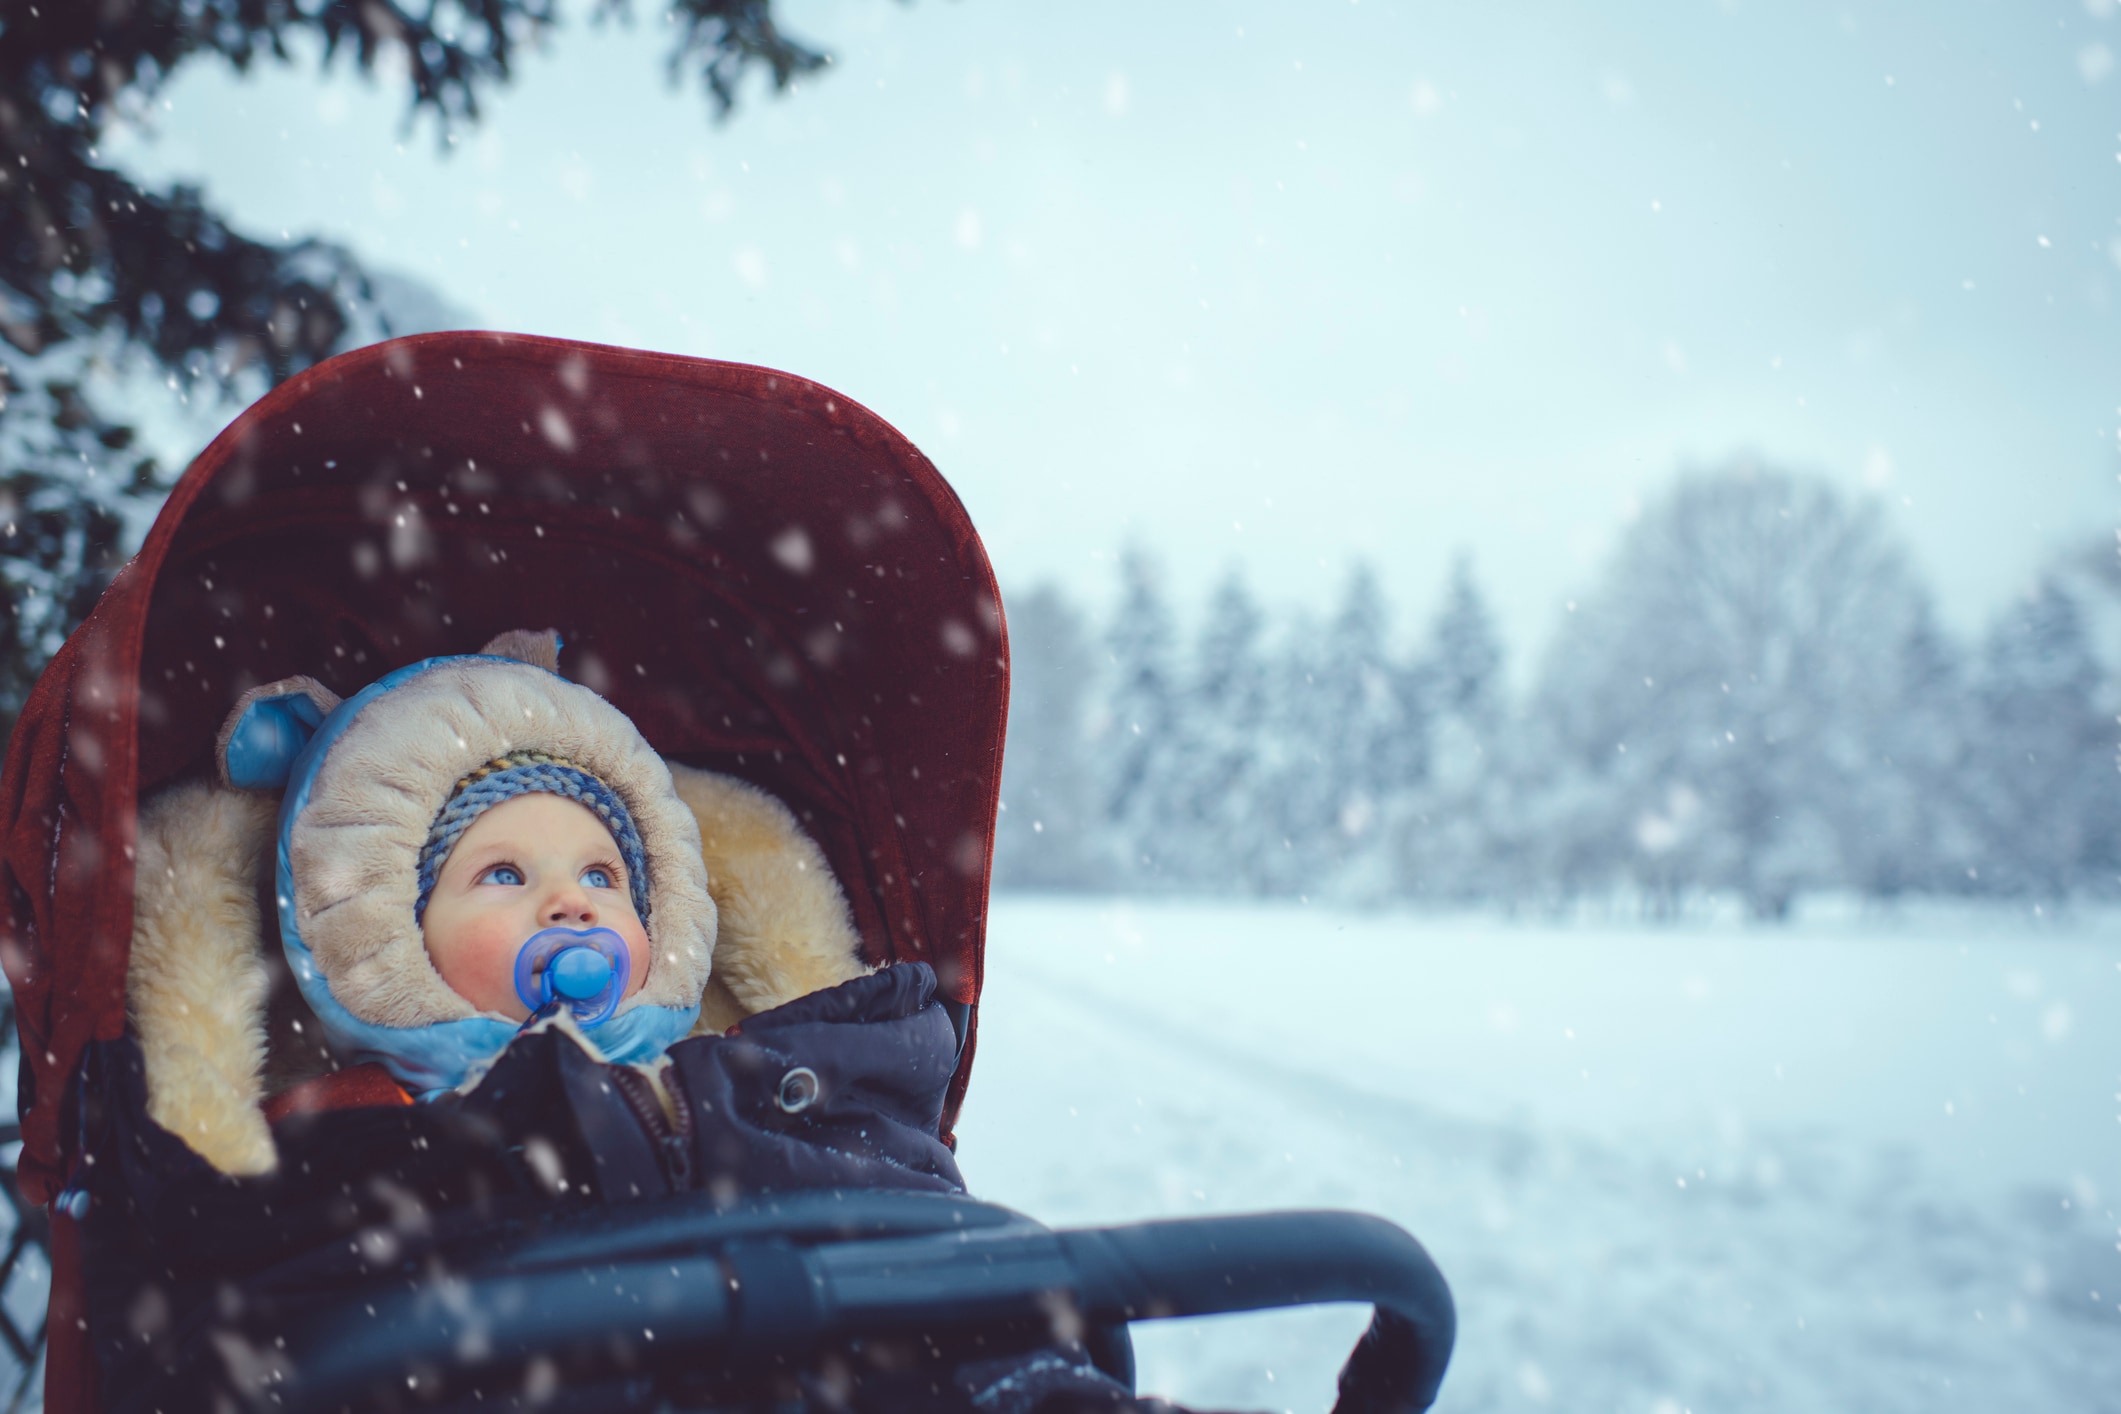 Can babies and kids go outside with a cold? Here’s what experts say